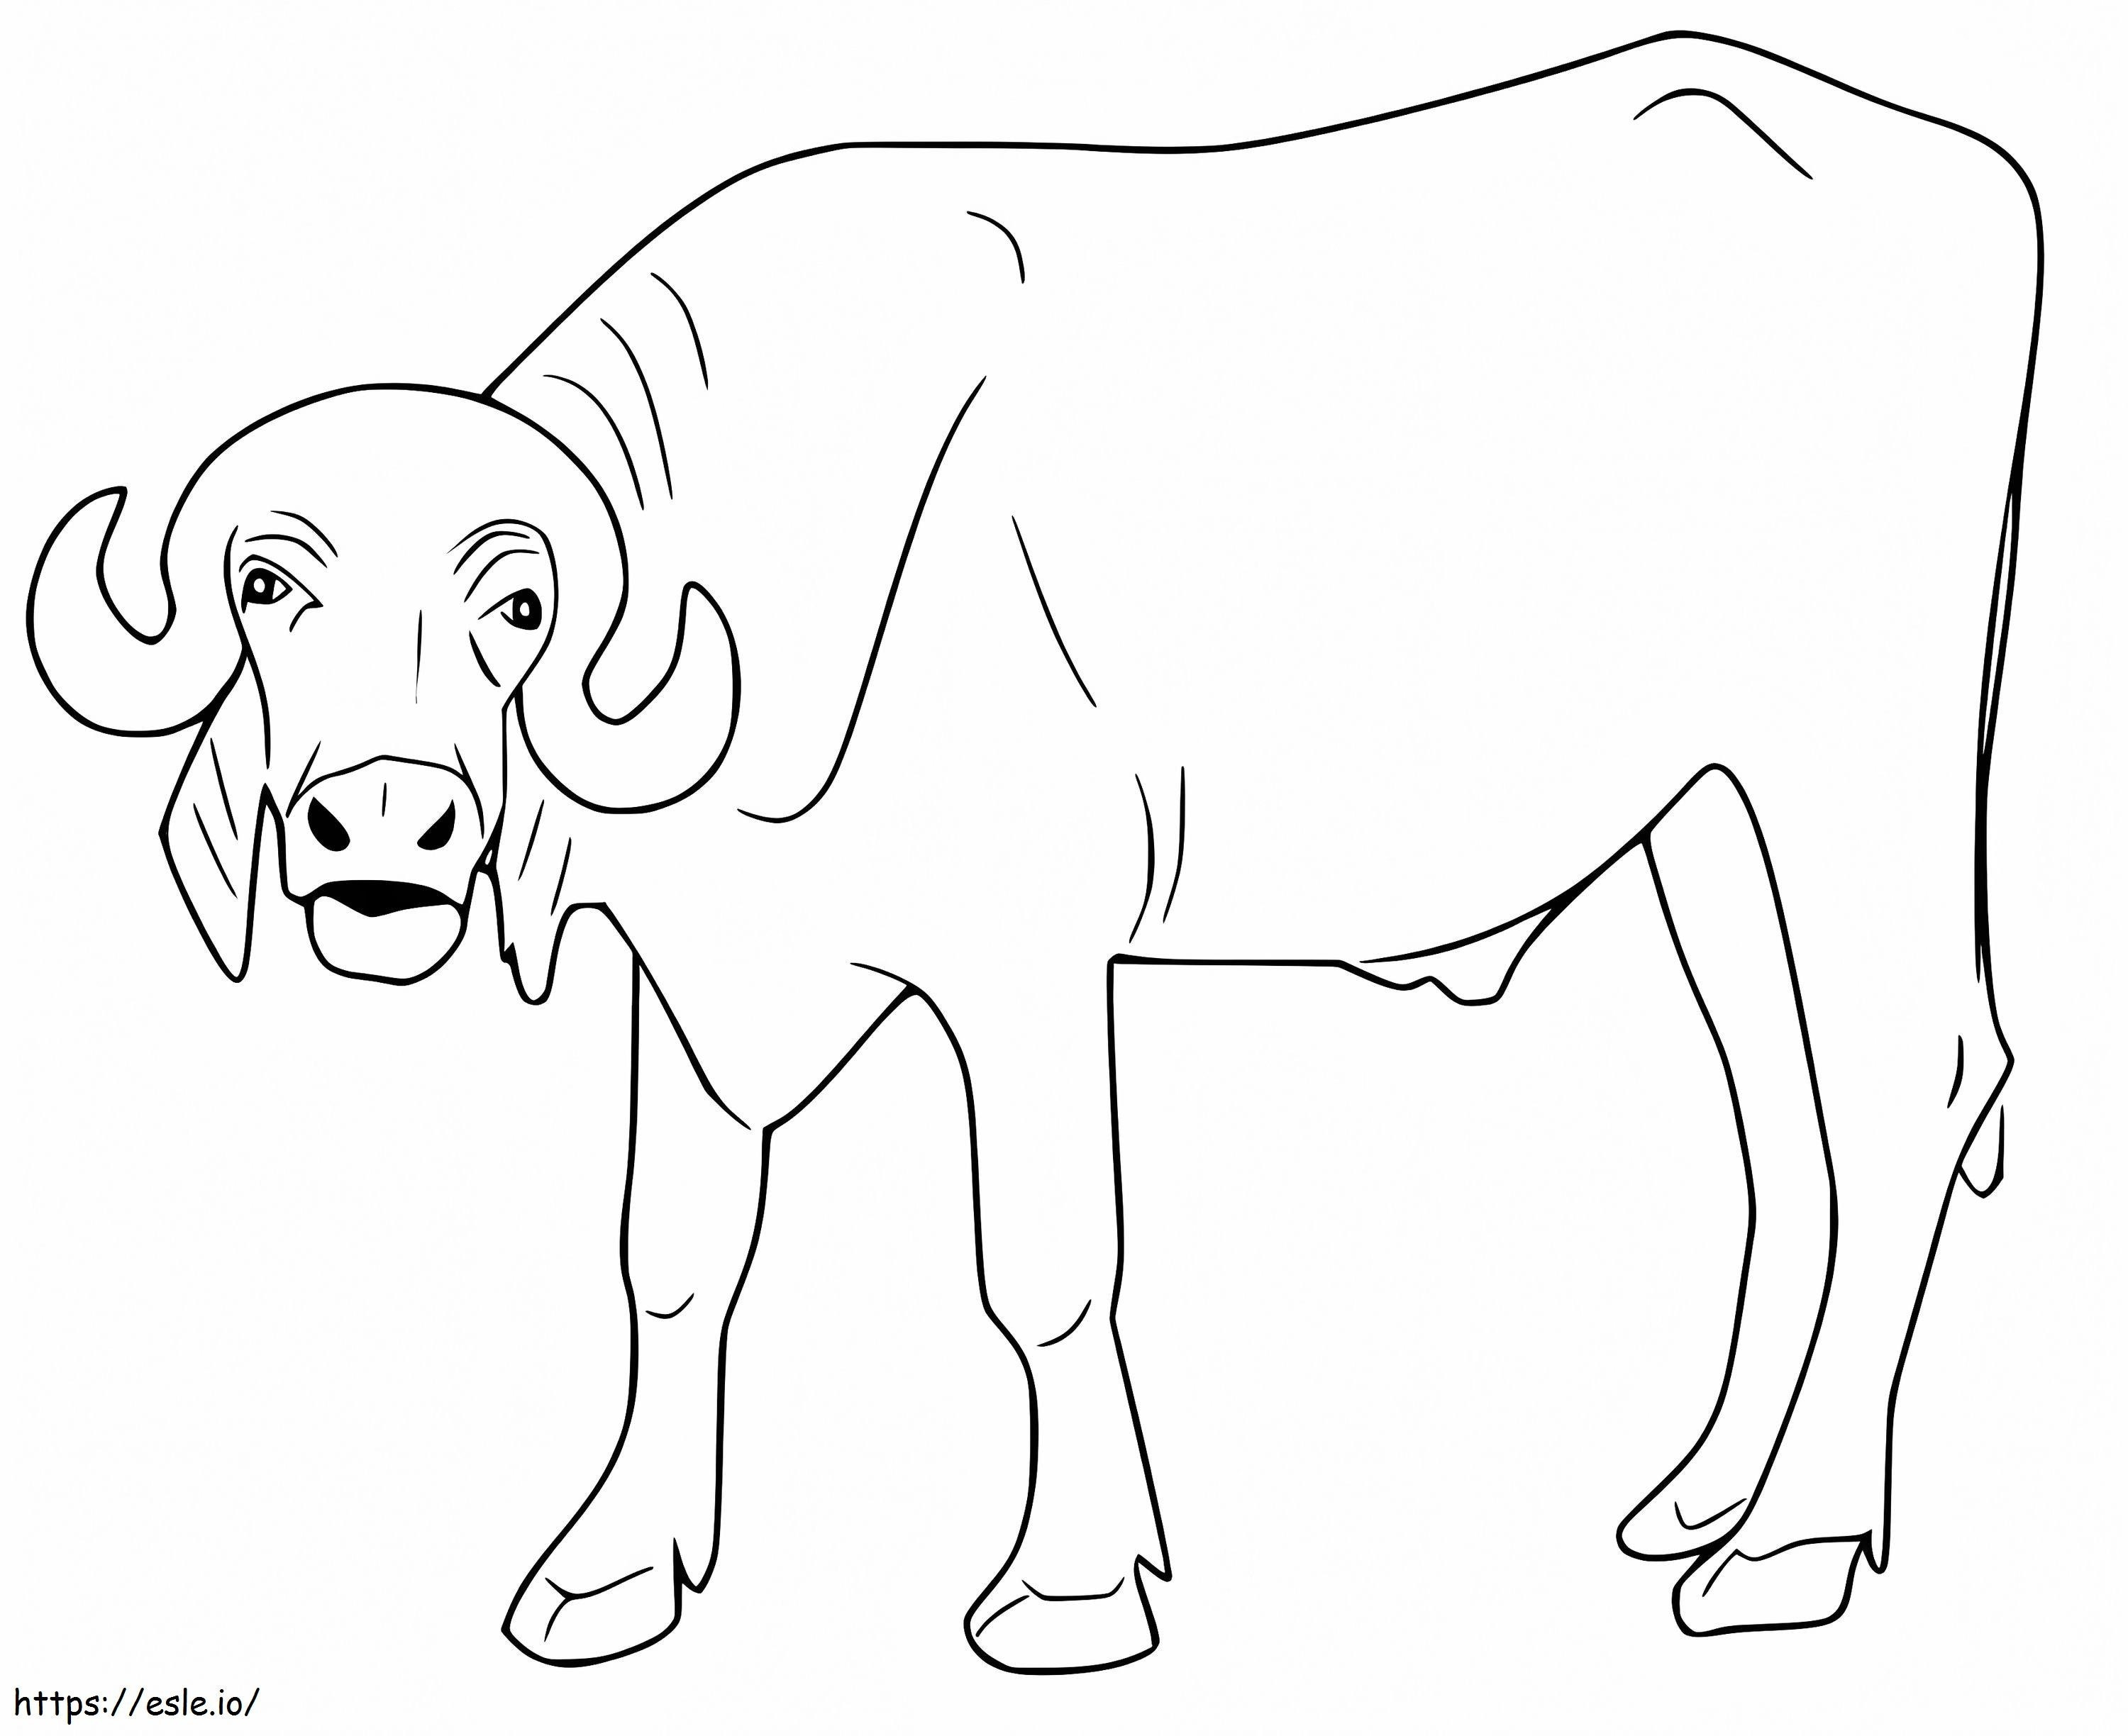 Bull 4 coloring page